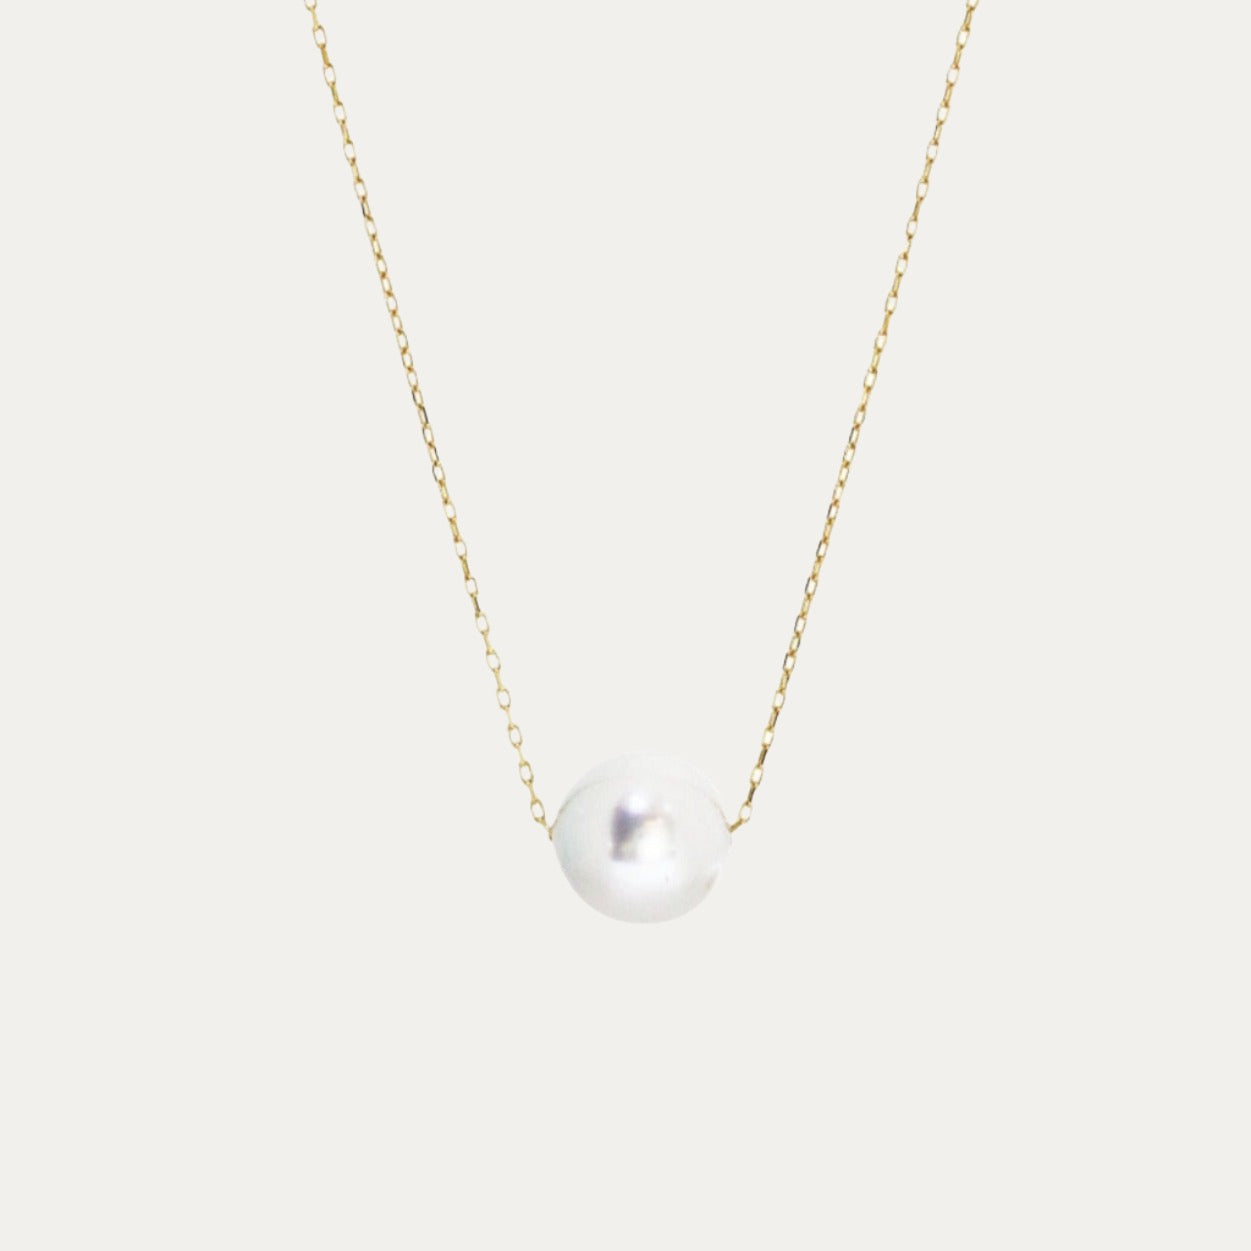 18k Yellow Gold Madama Pearl Necklace (Adjustable)